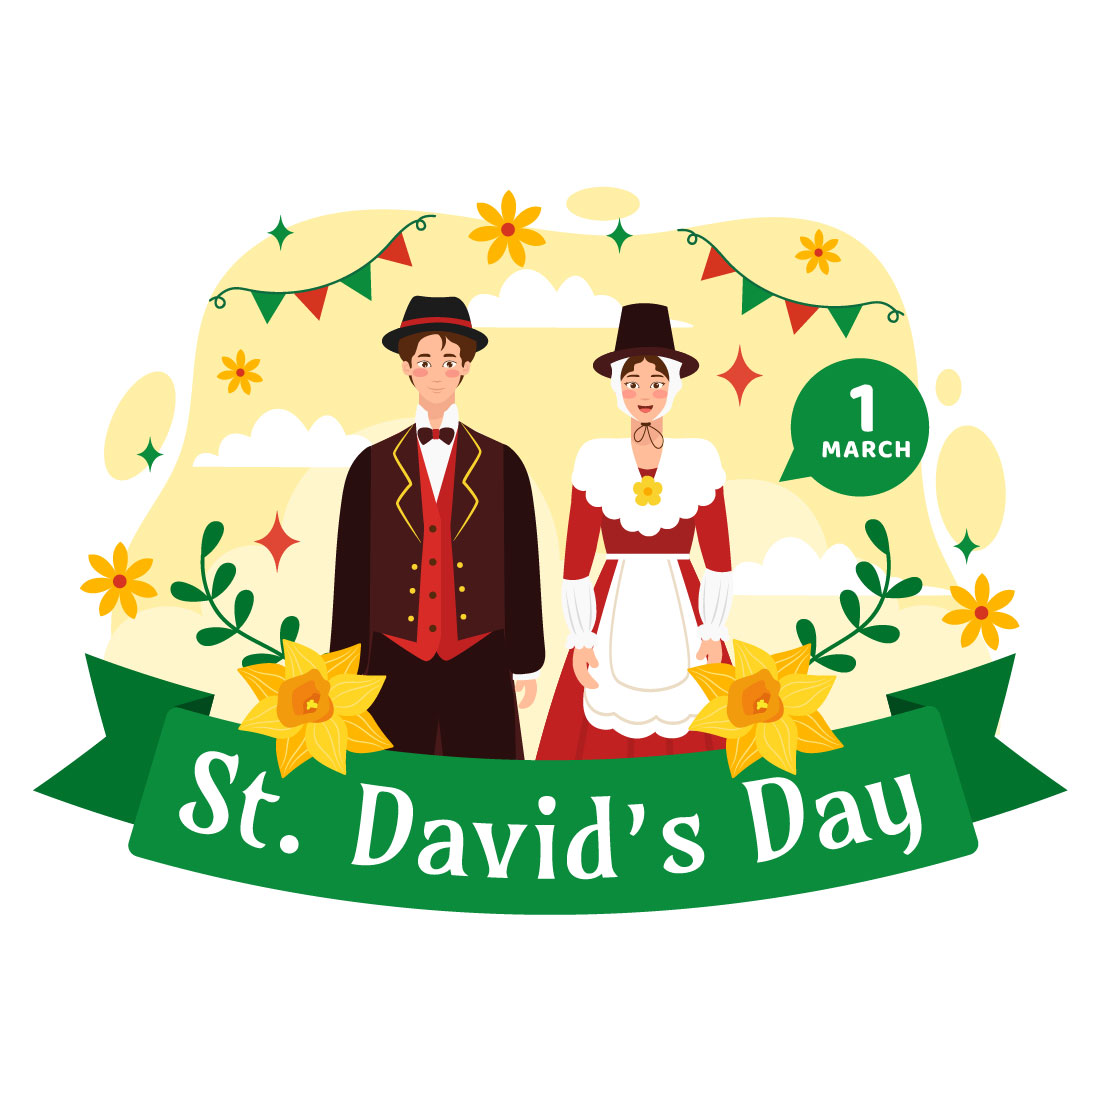 12 St David's Day Illustration preview image.